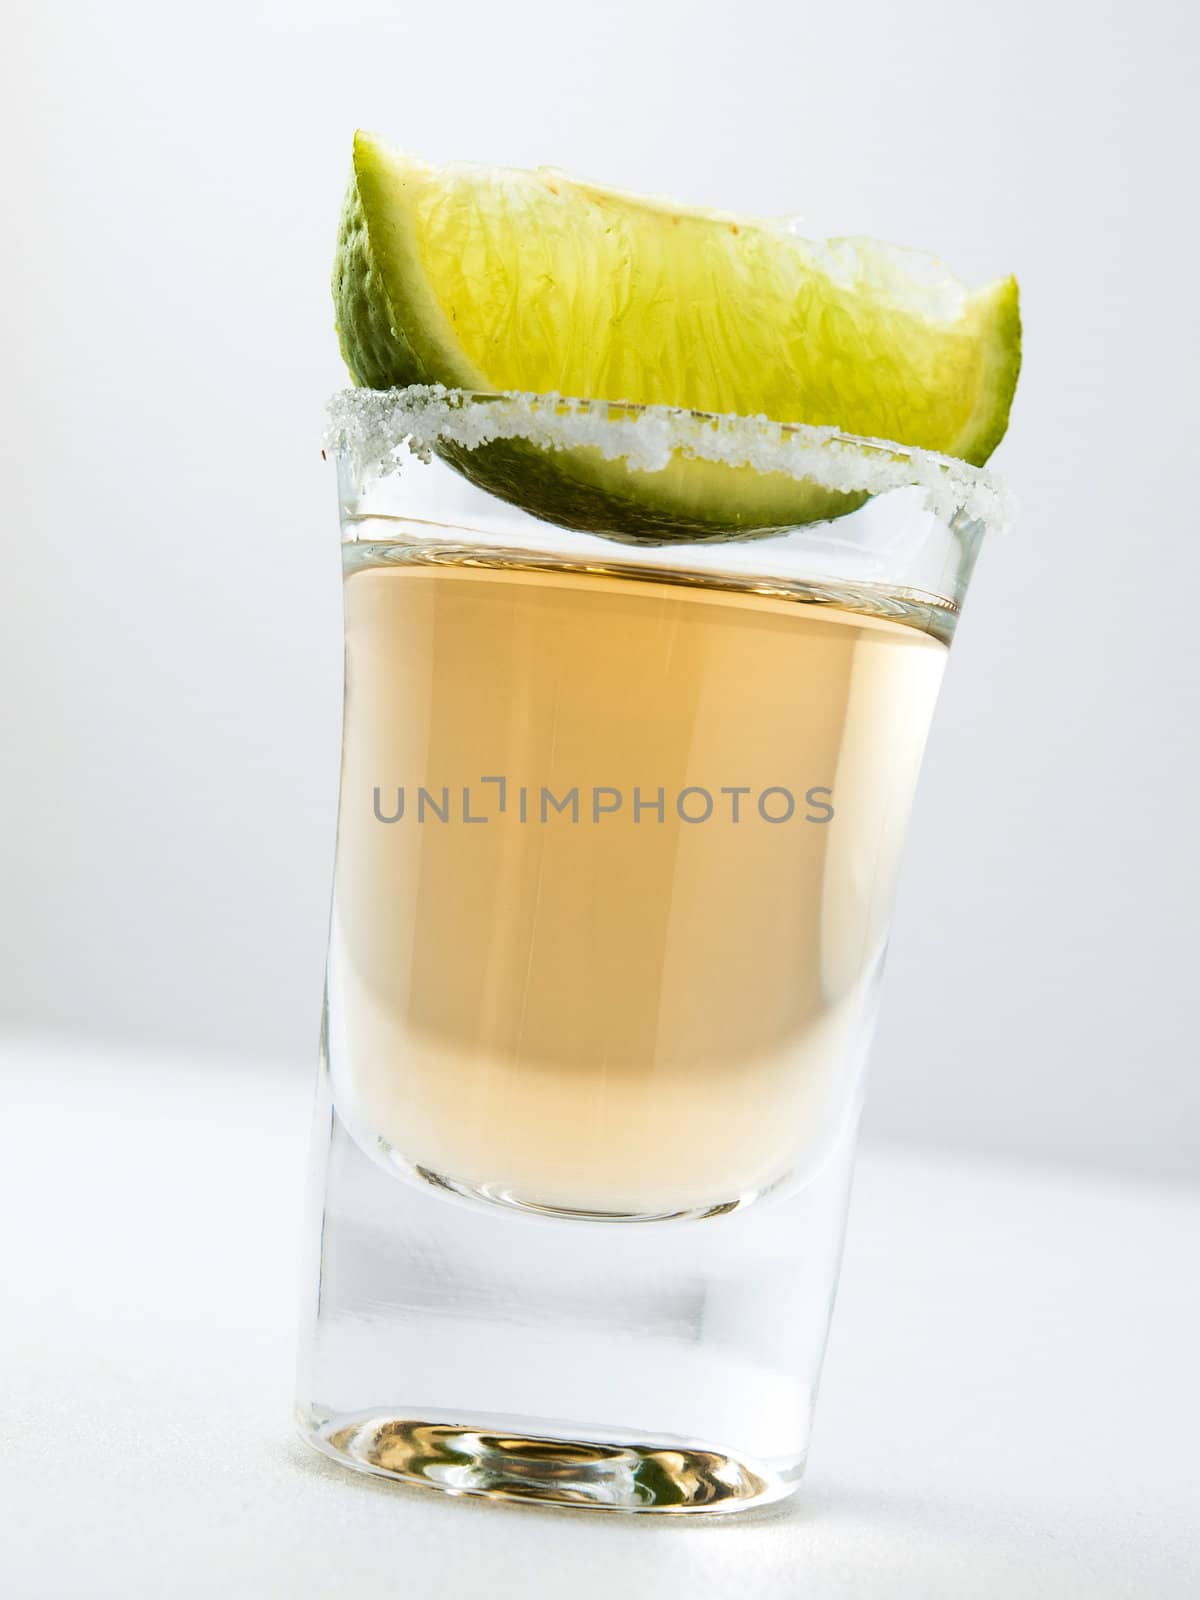 A shot of tequila and lime in a shot glass with a salt rim